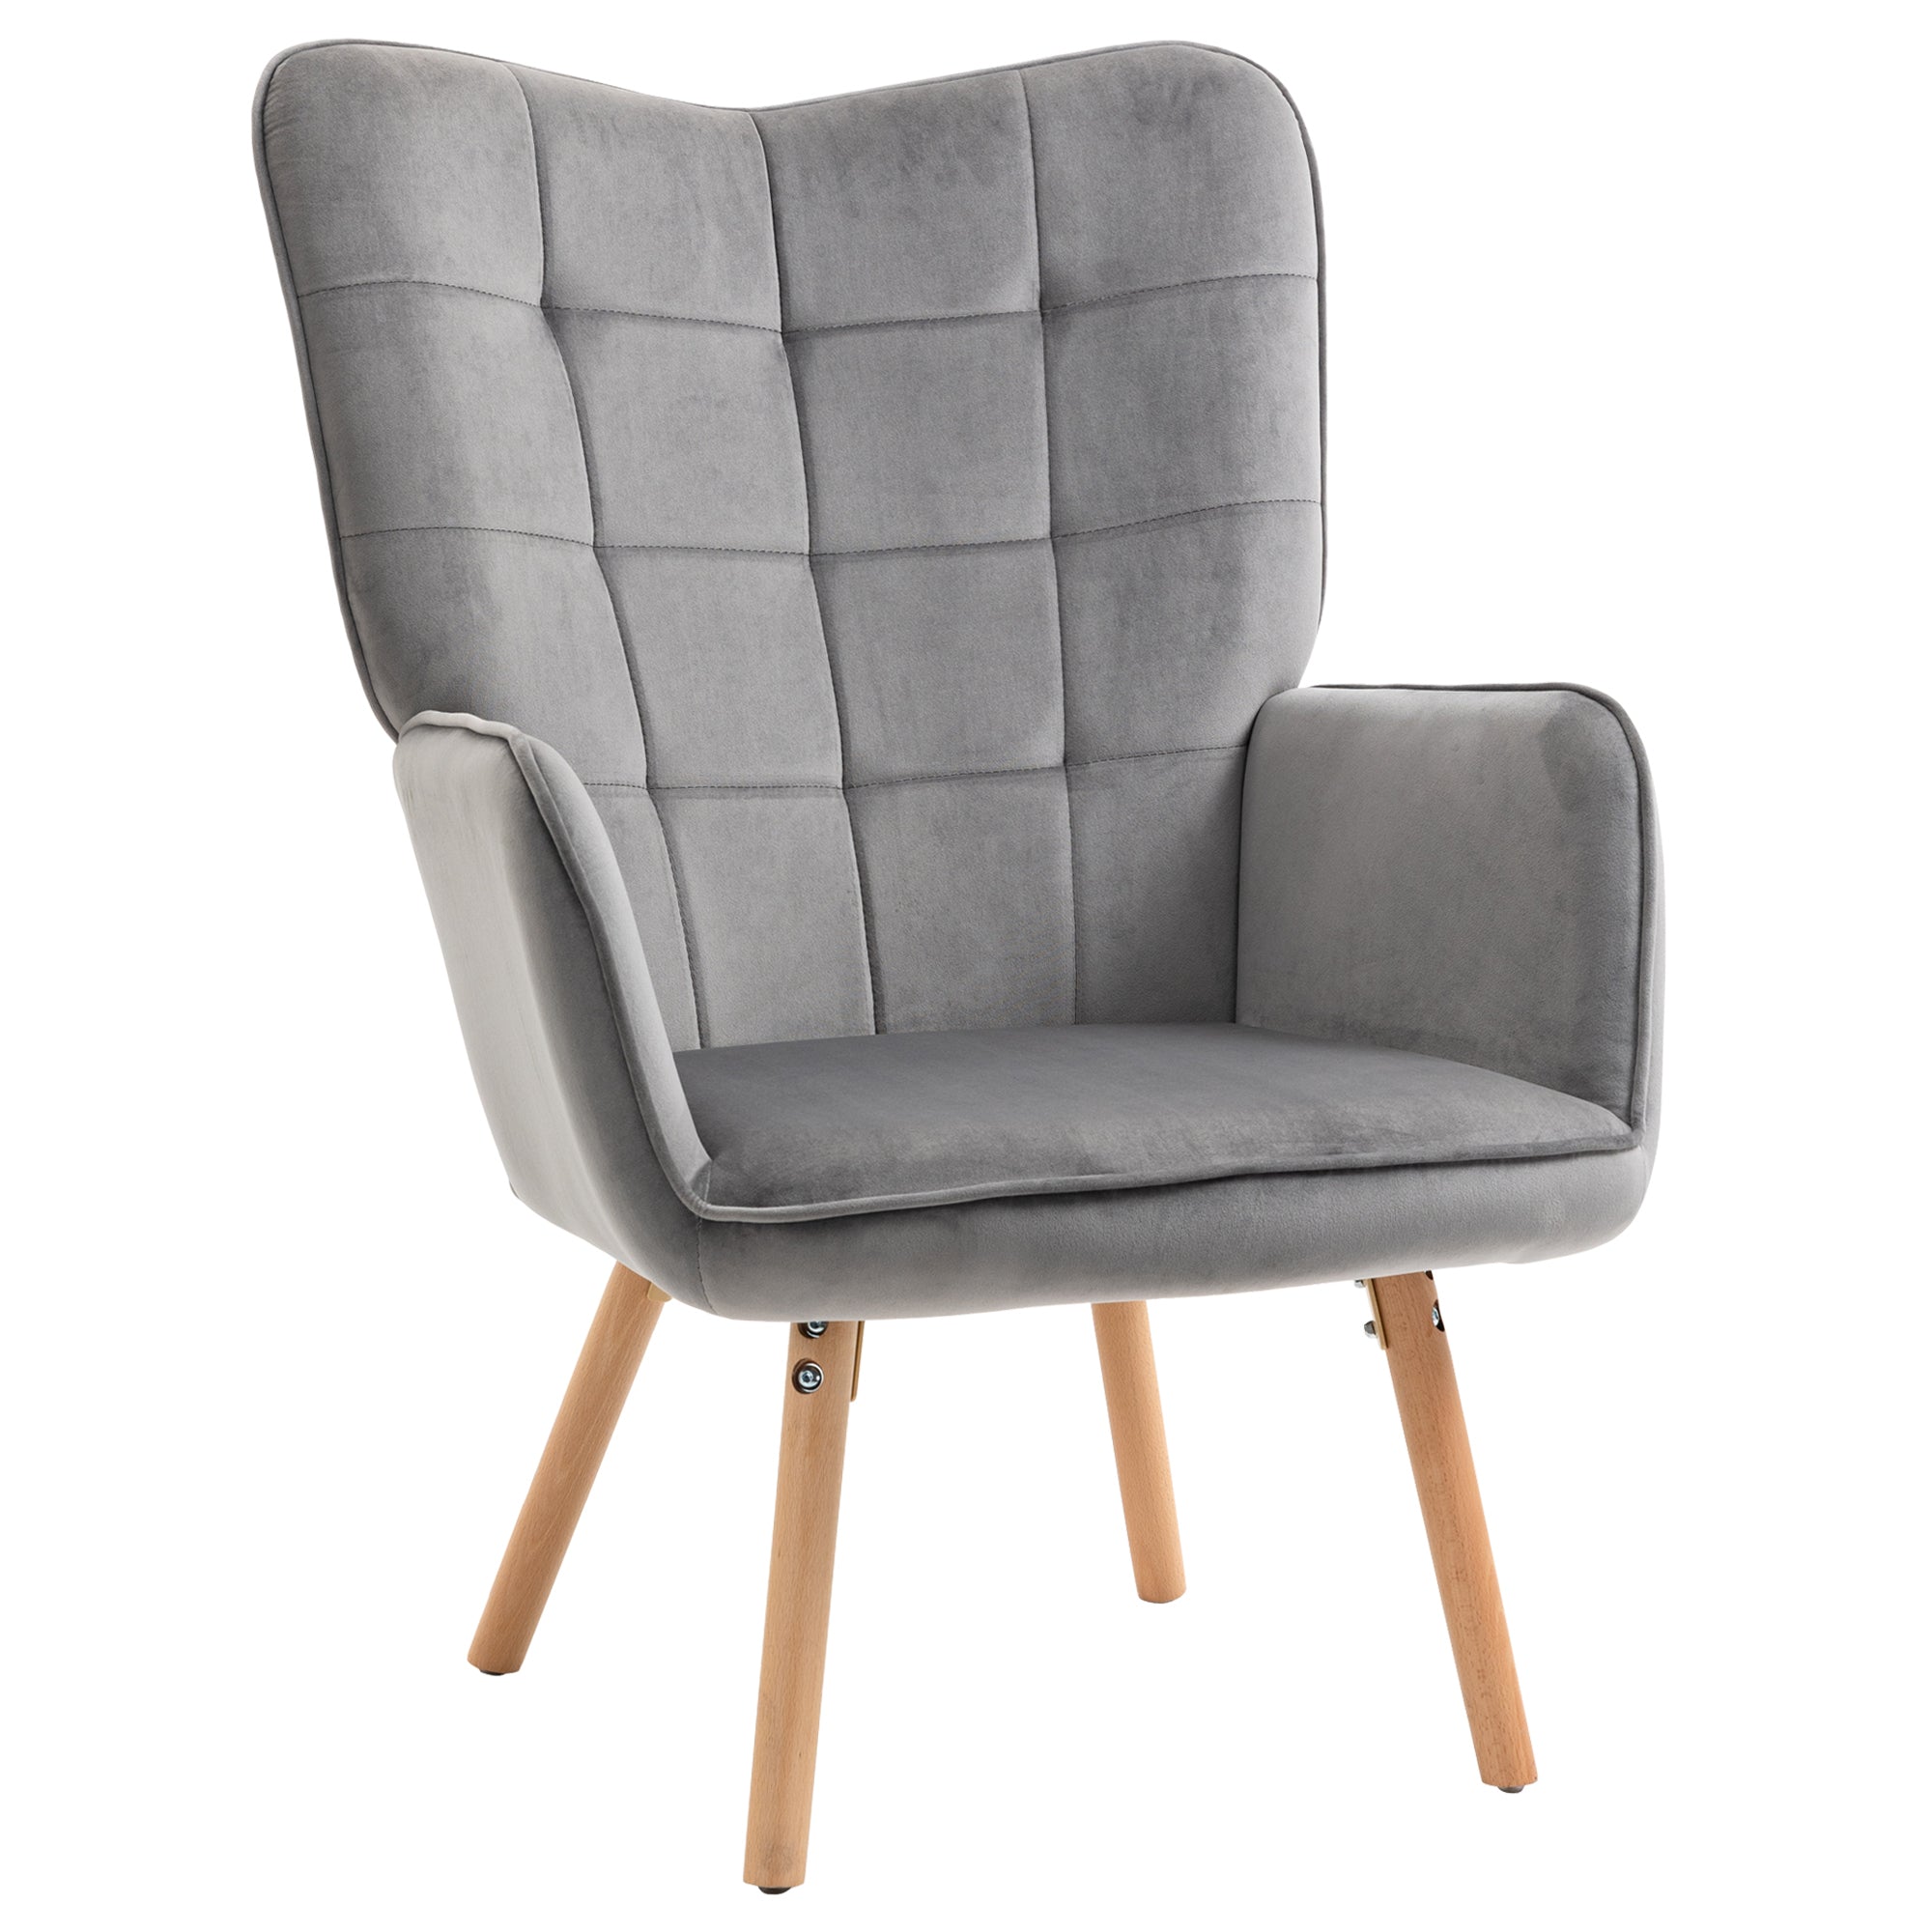 Modern Accent Chair Velvet-Touch Tufted Wingback Armchair Upholstered Leisure Lounge Sofa Club Chair with Wood Legs, Grey-0